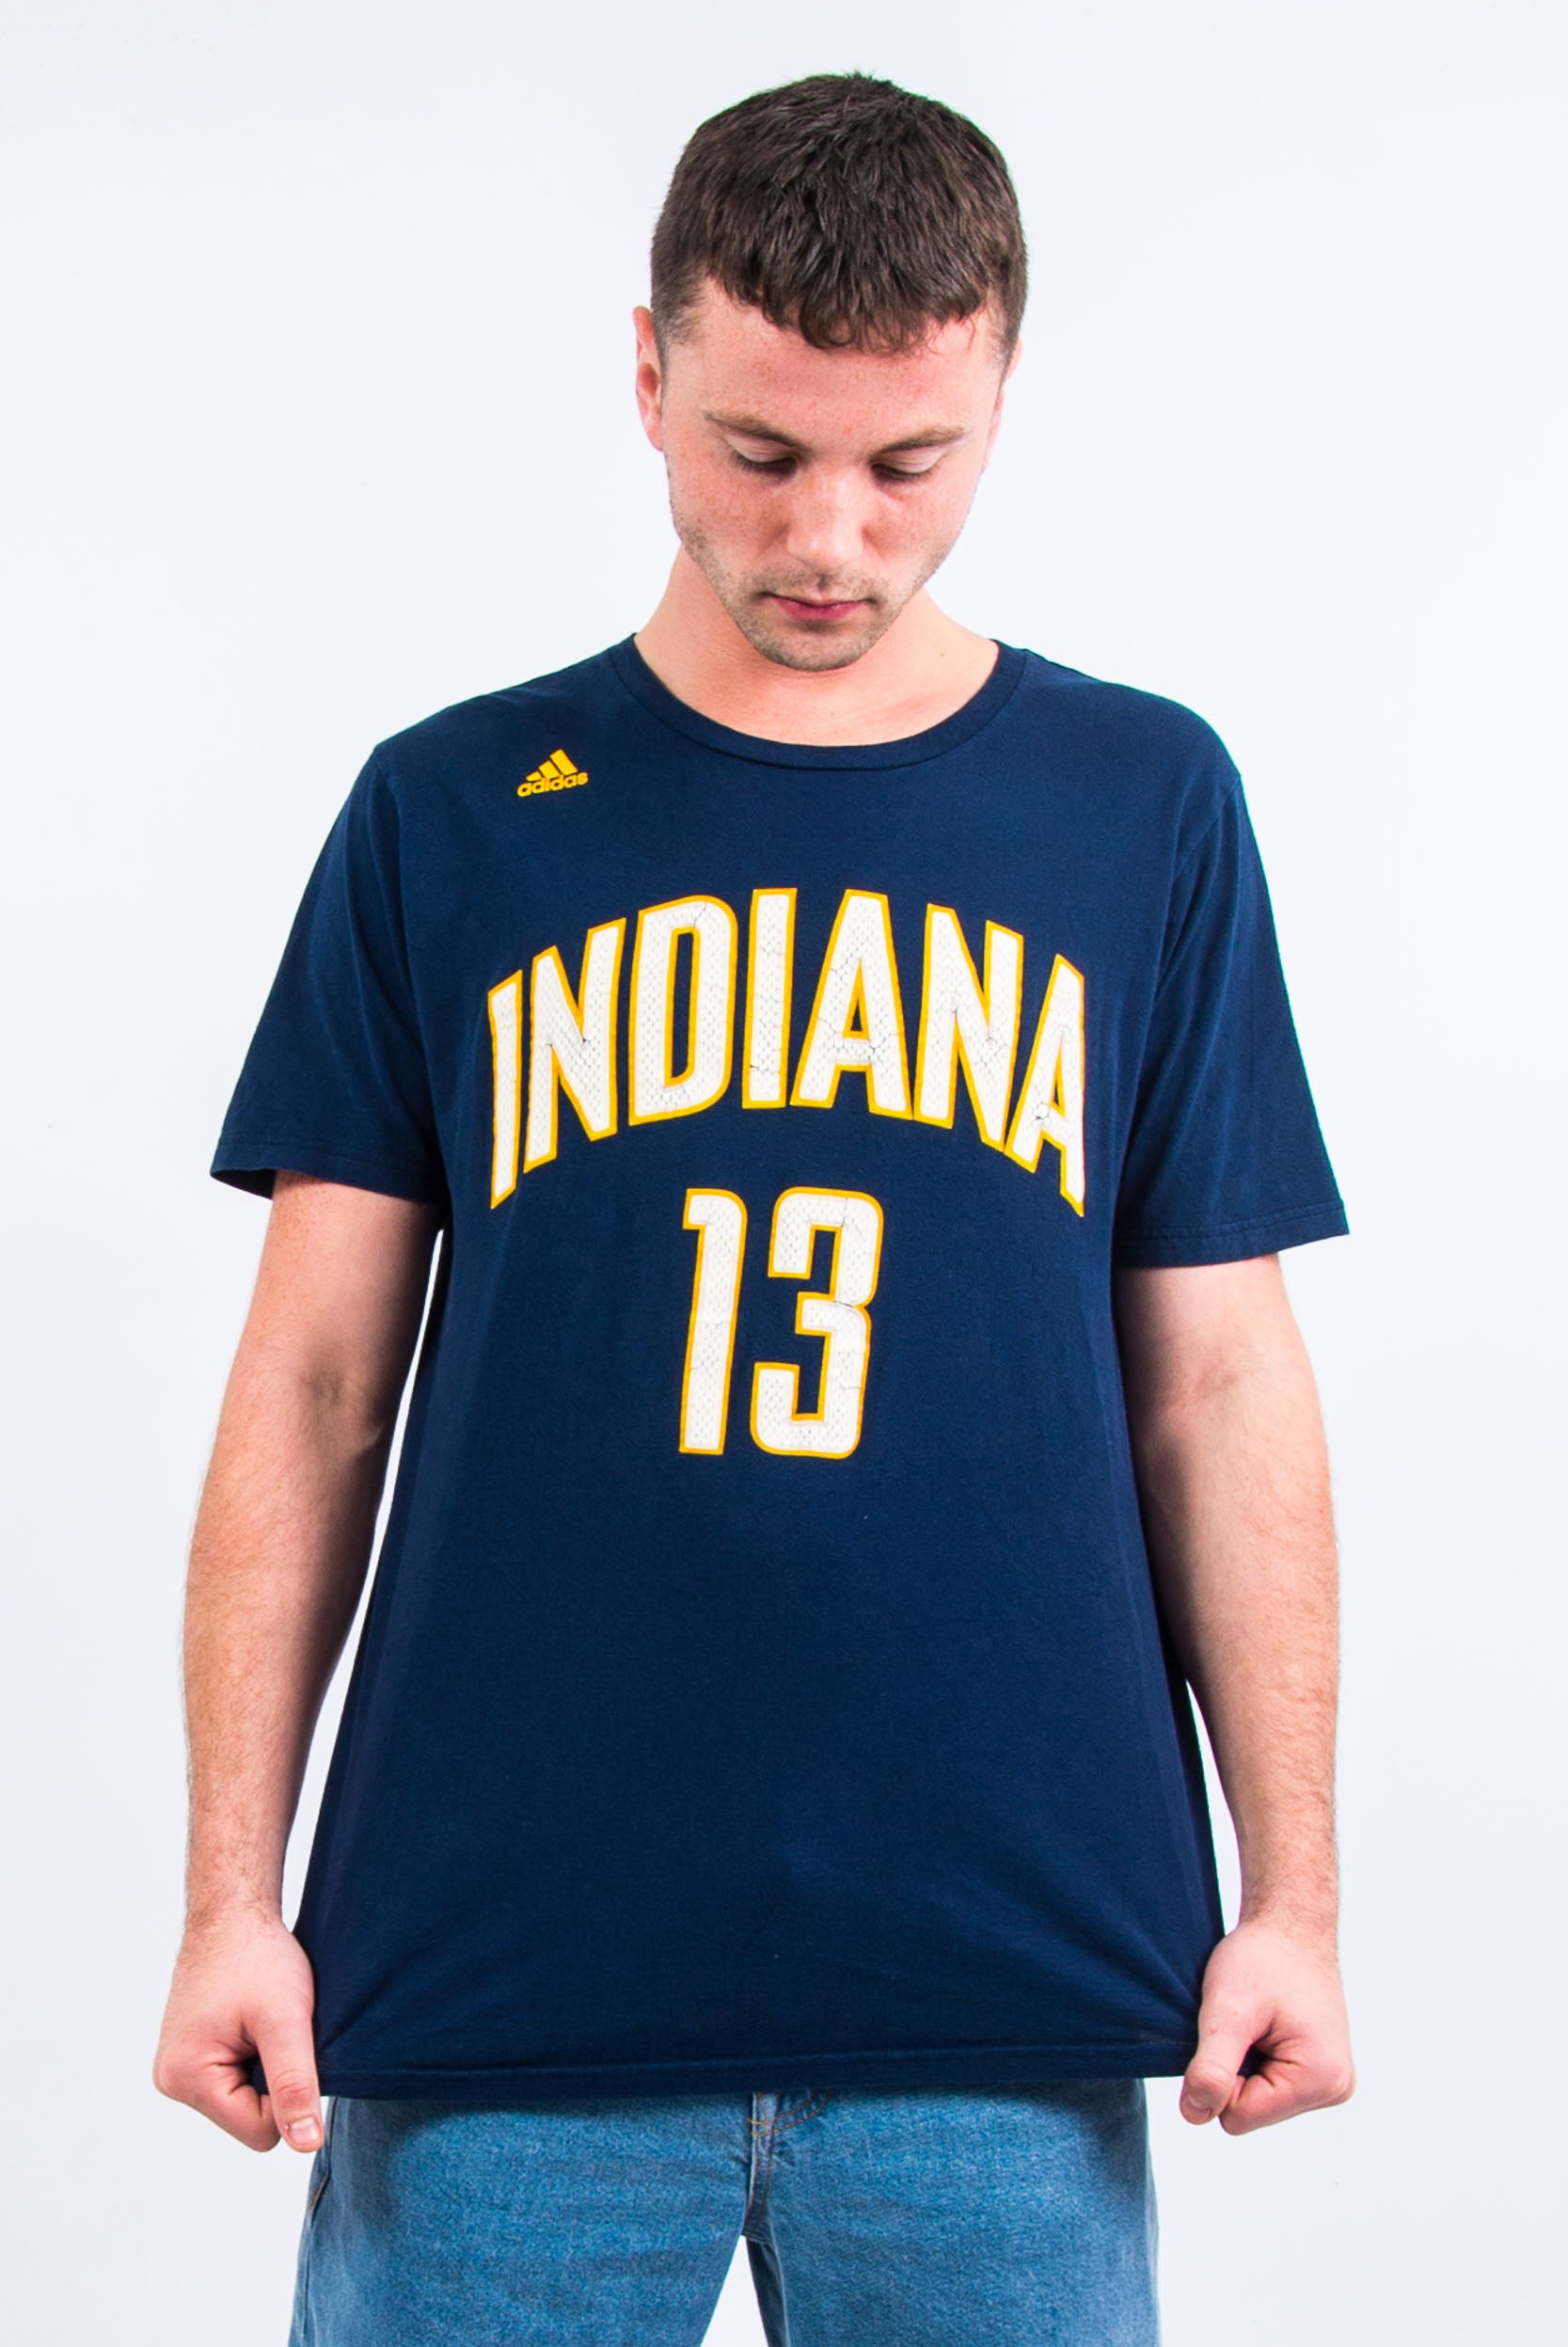 Adidas Indiana Pacers Paul George #13 Basketball Jersey Size S